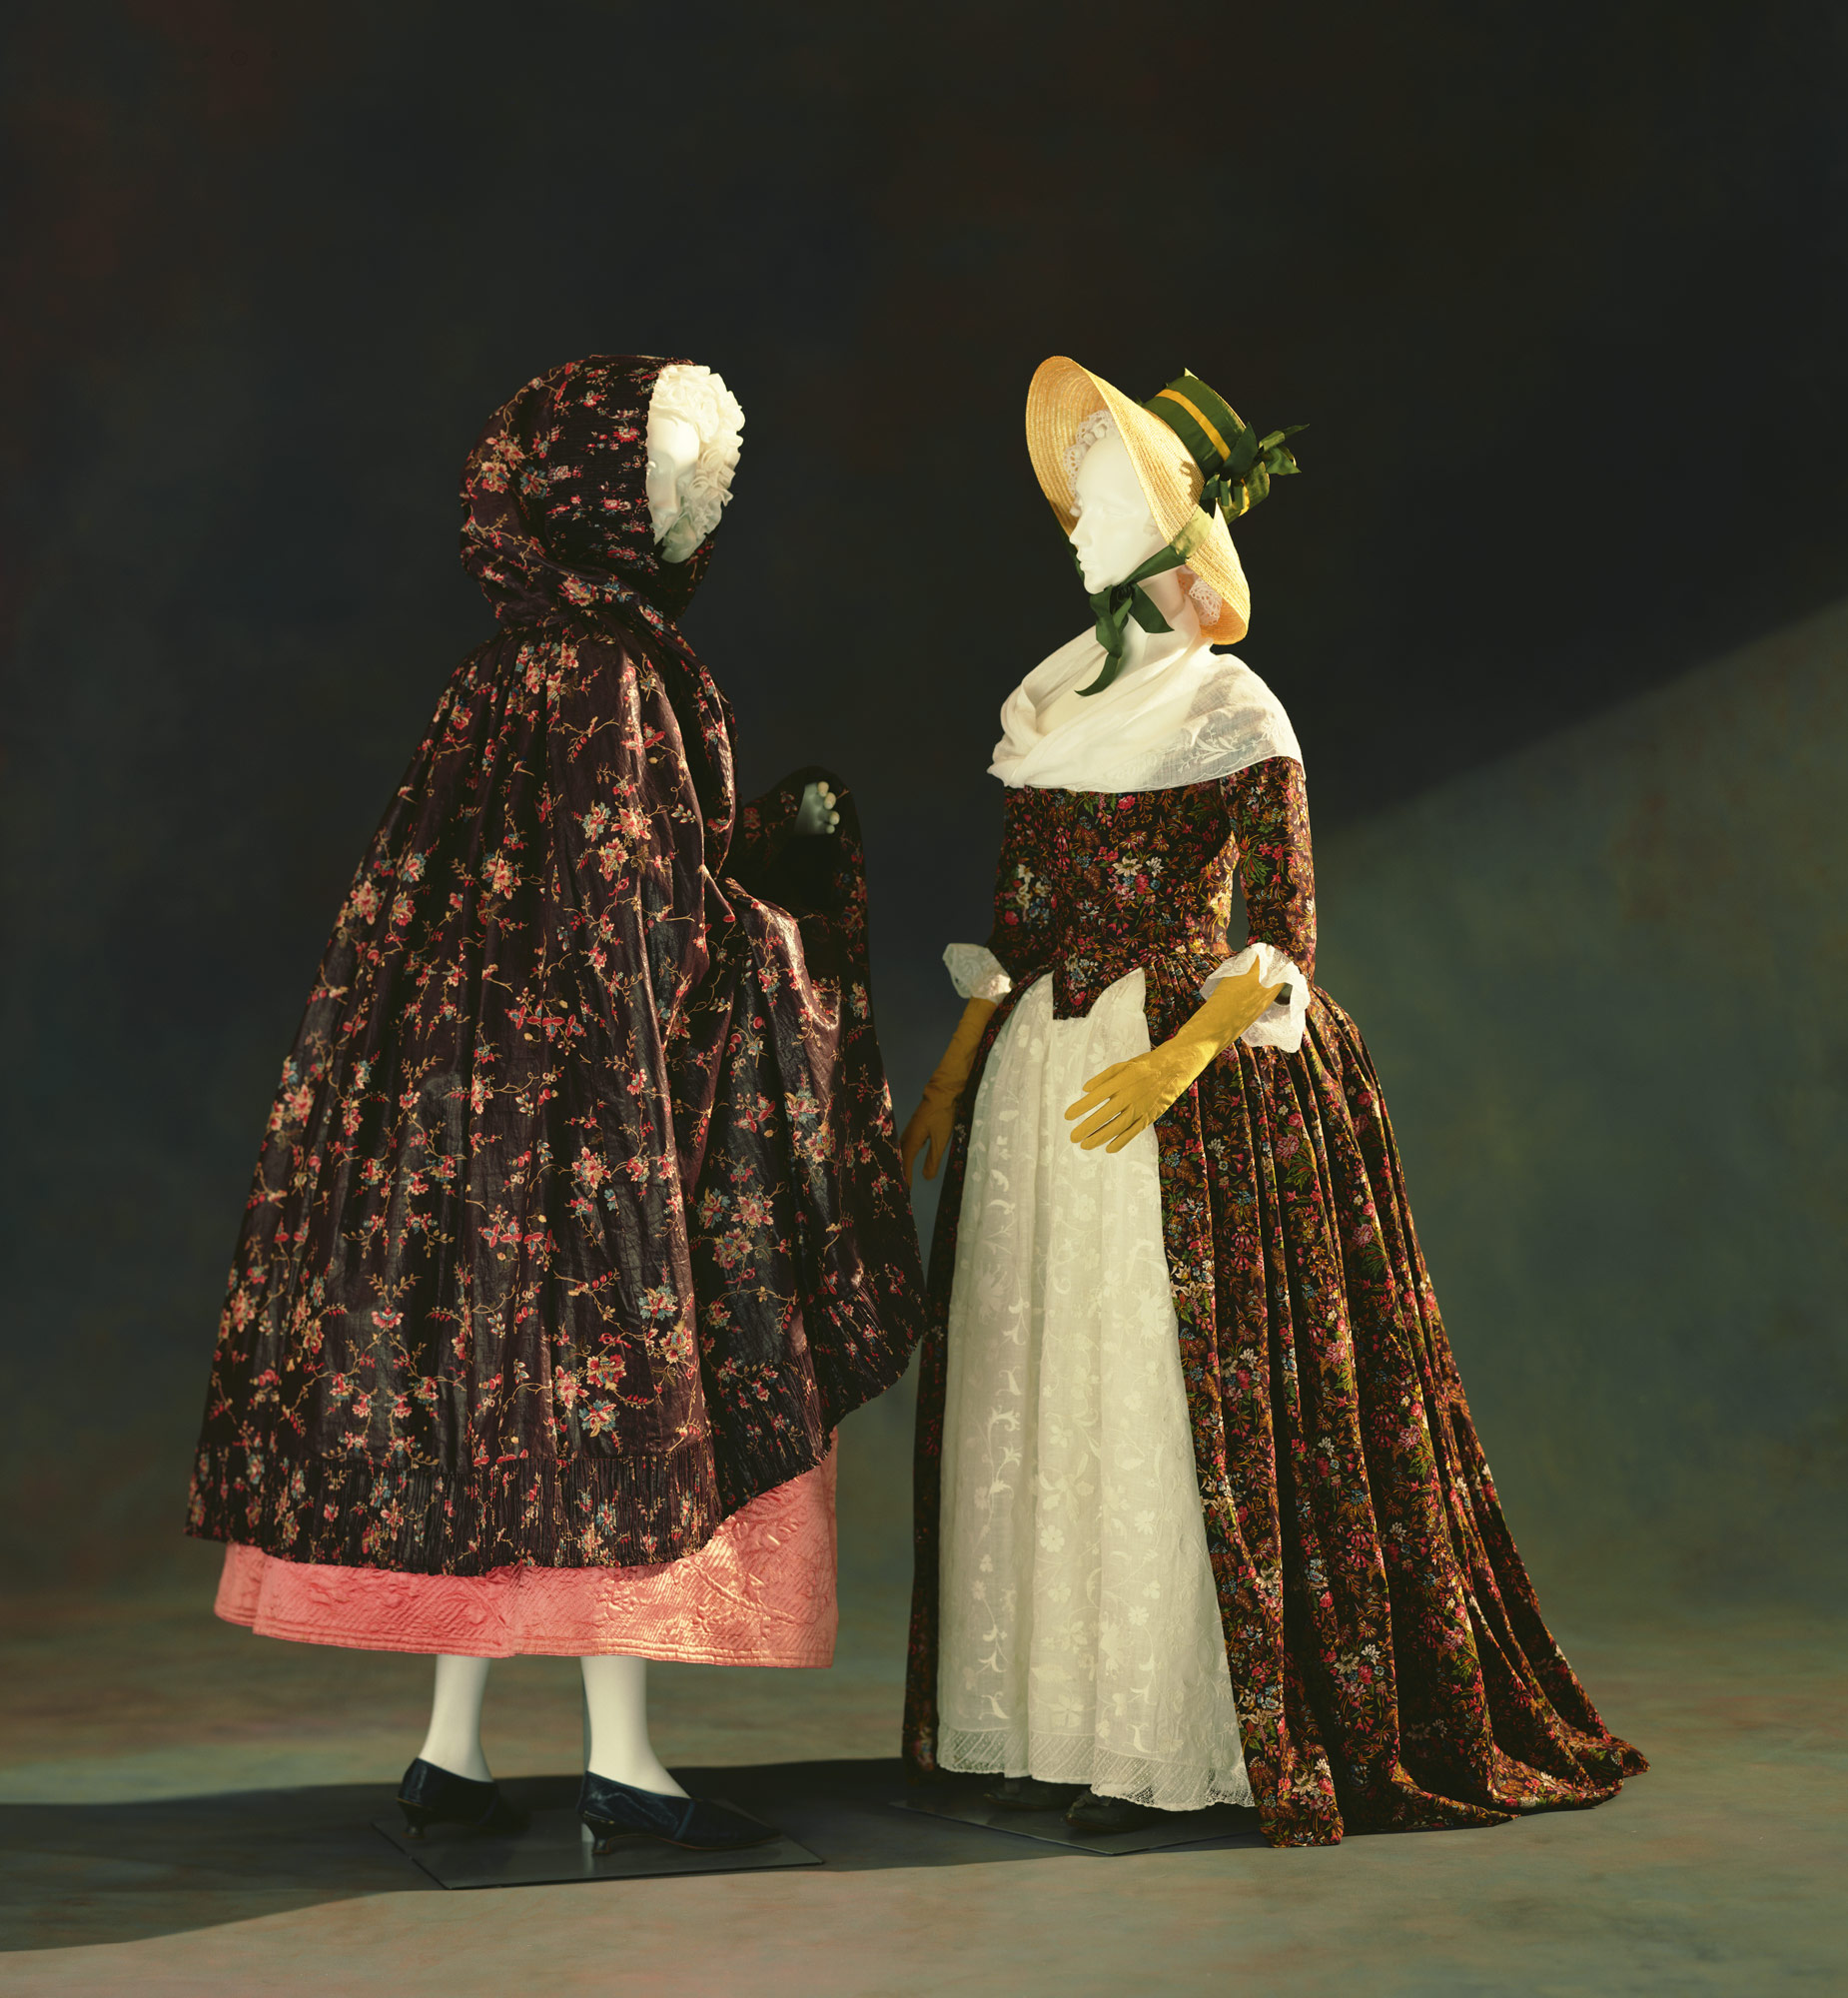 Hooded Cape, Petticoat [Left] Dress (robe à l'anglaise) [Right]